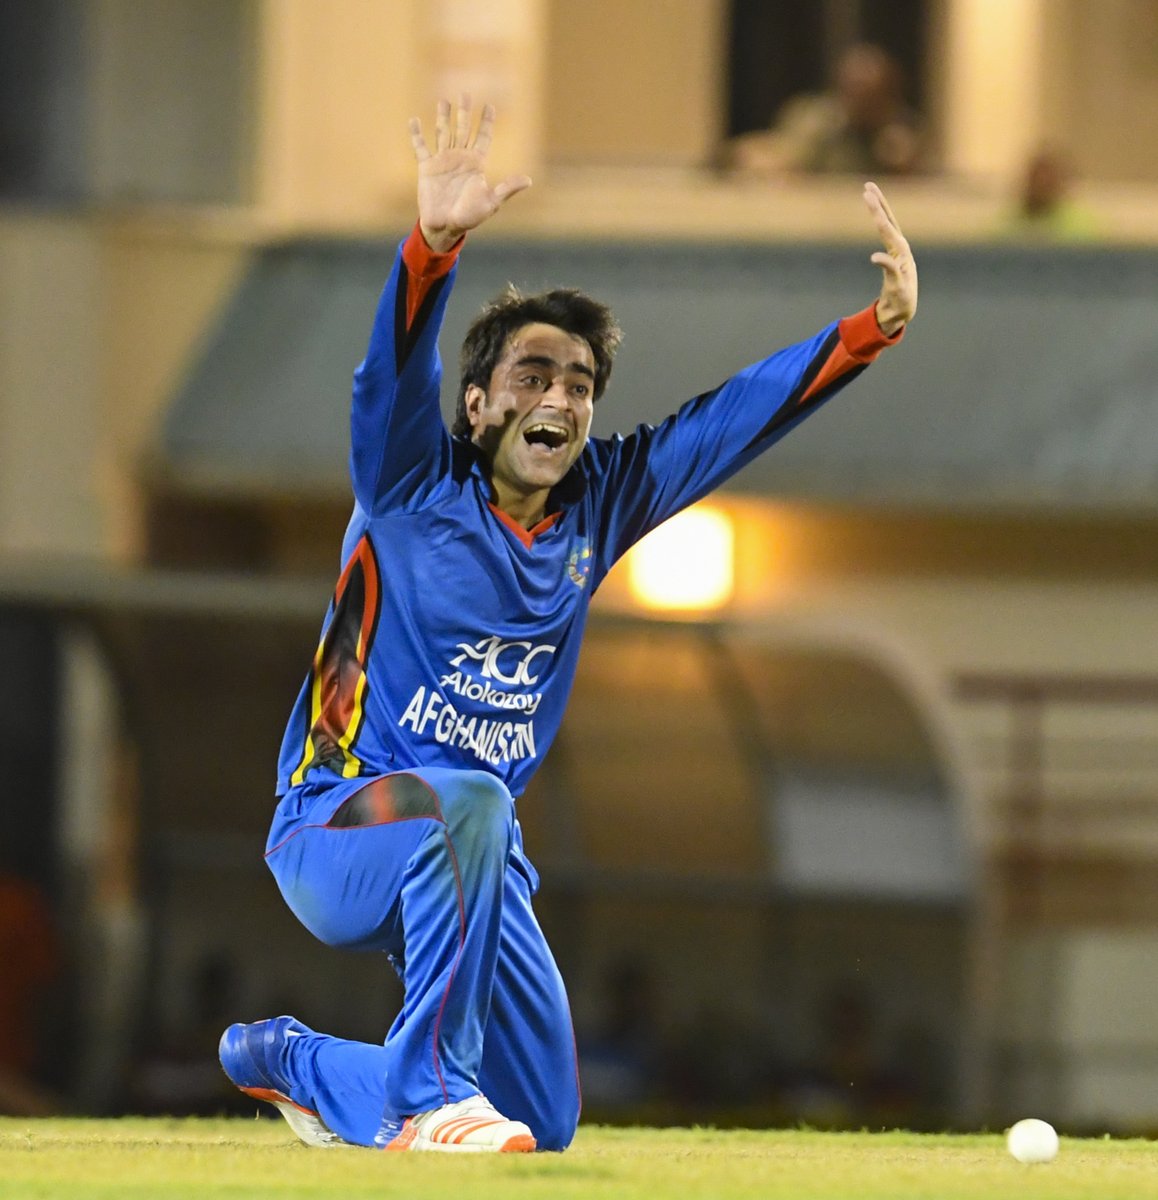 Twitter reacts to Rashid Khan becoming youngest to reach top of ODI rankings